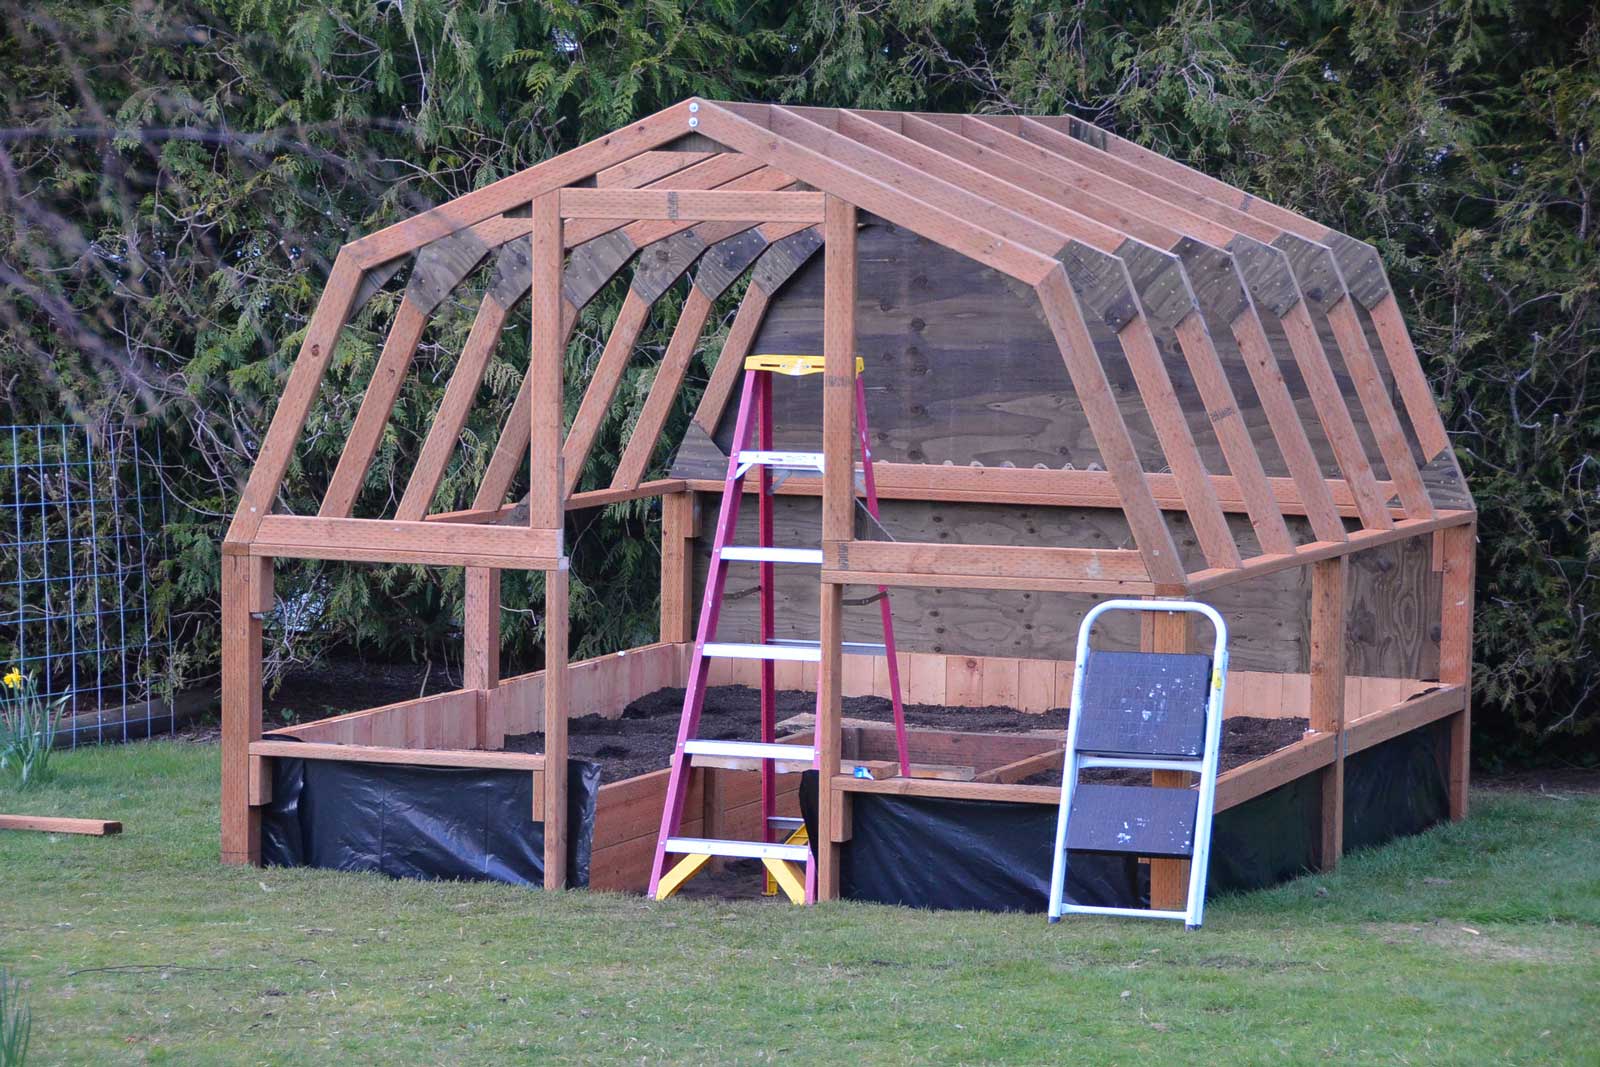 Wooden greenhouse frame ready to skin with Solexx twin-wall covering